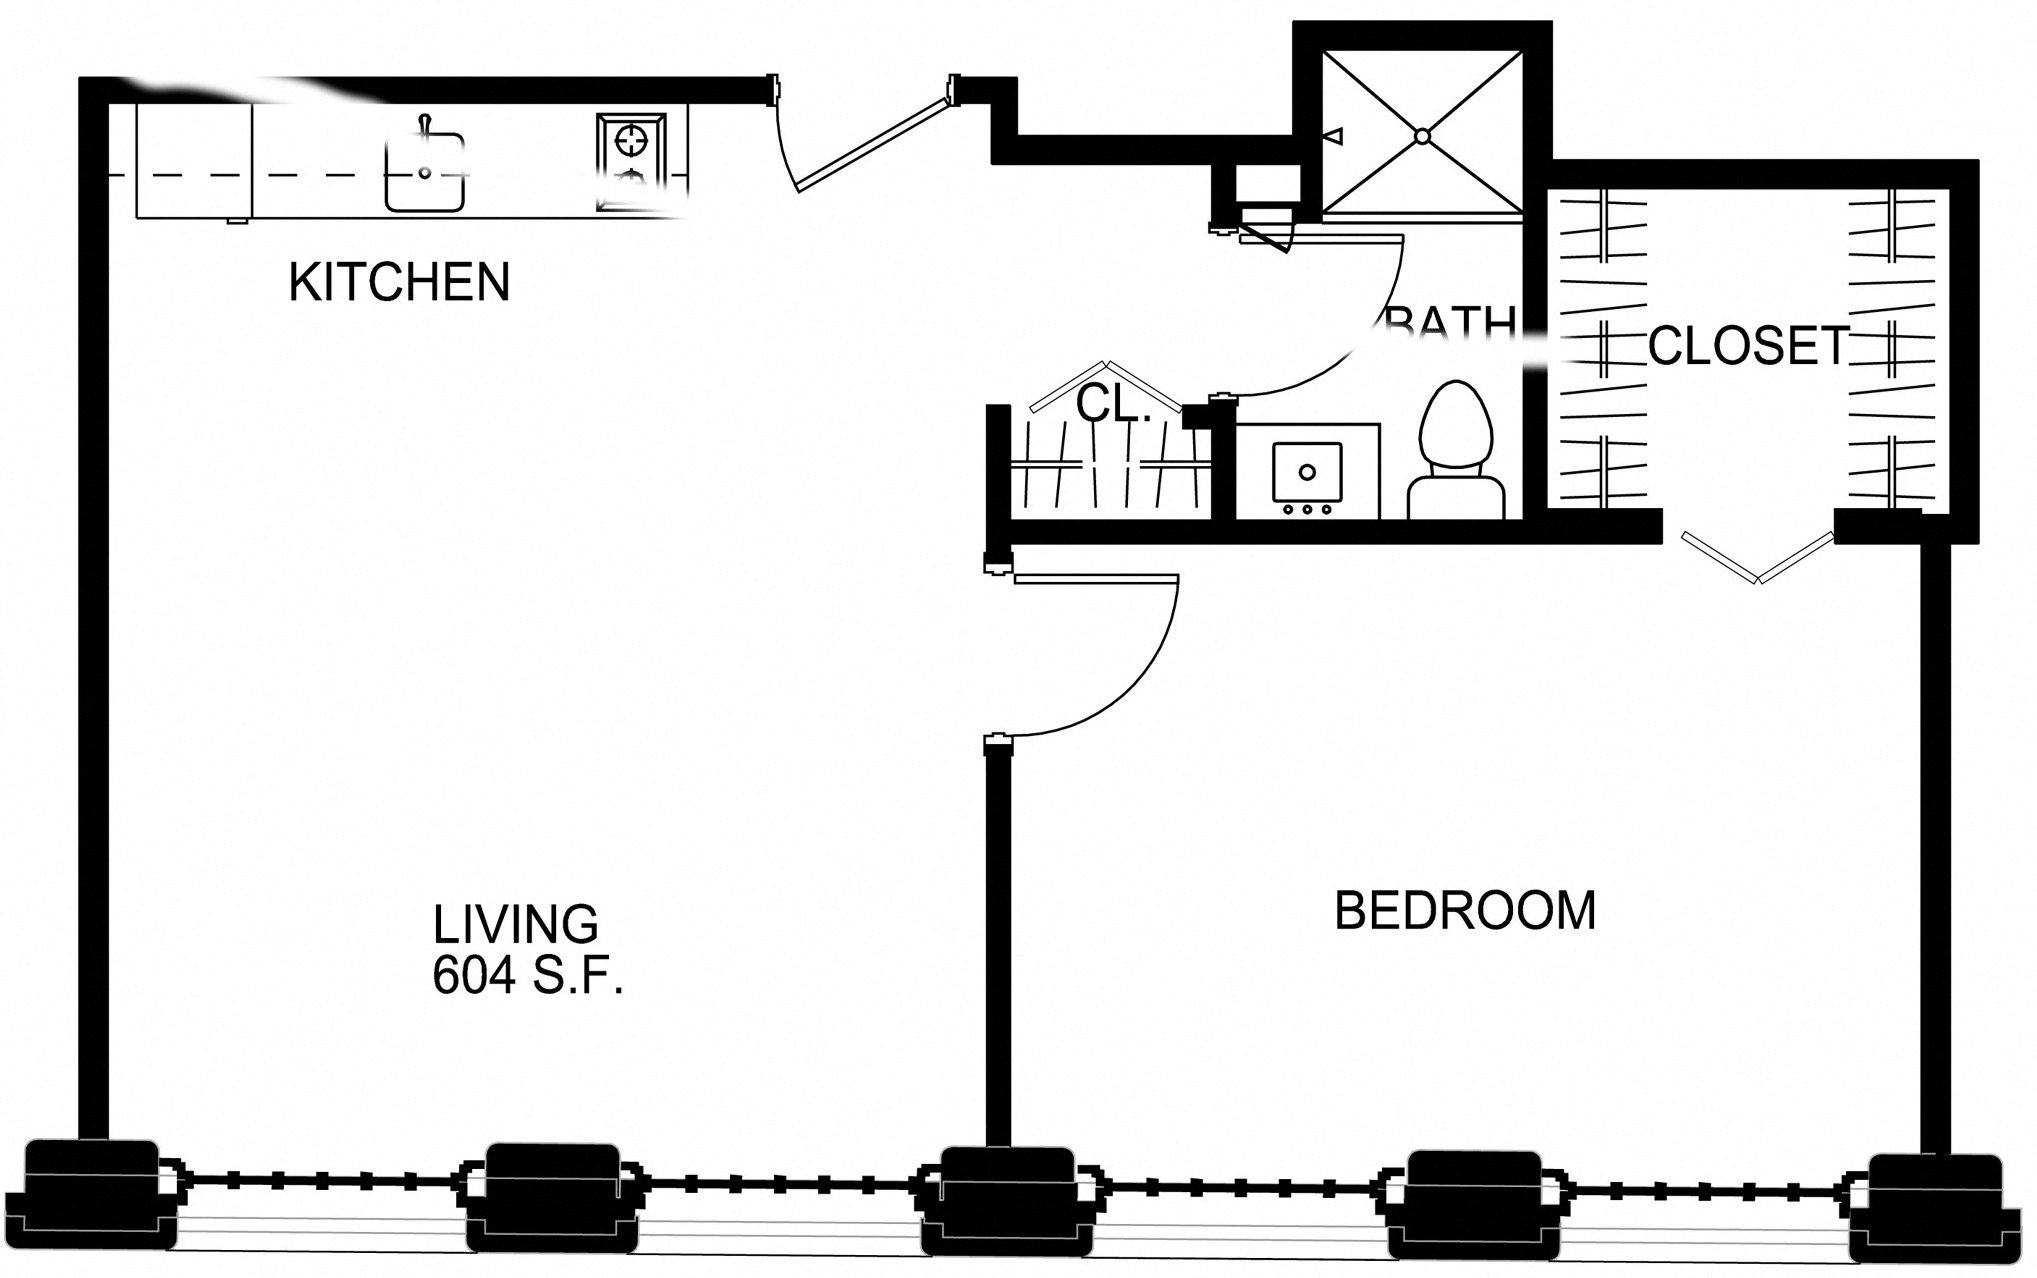 Floorplan for Apartment #S2214, 1 bedroom unit at Halstead Providence